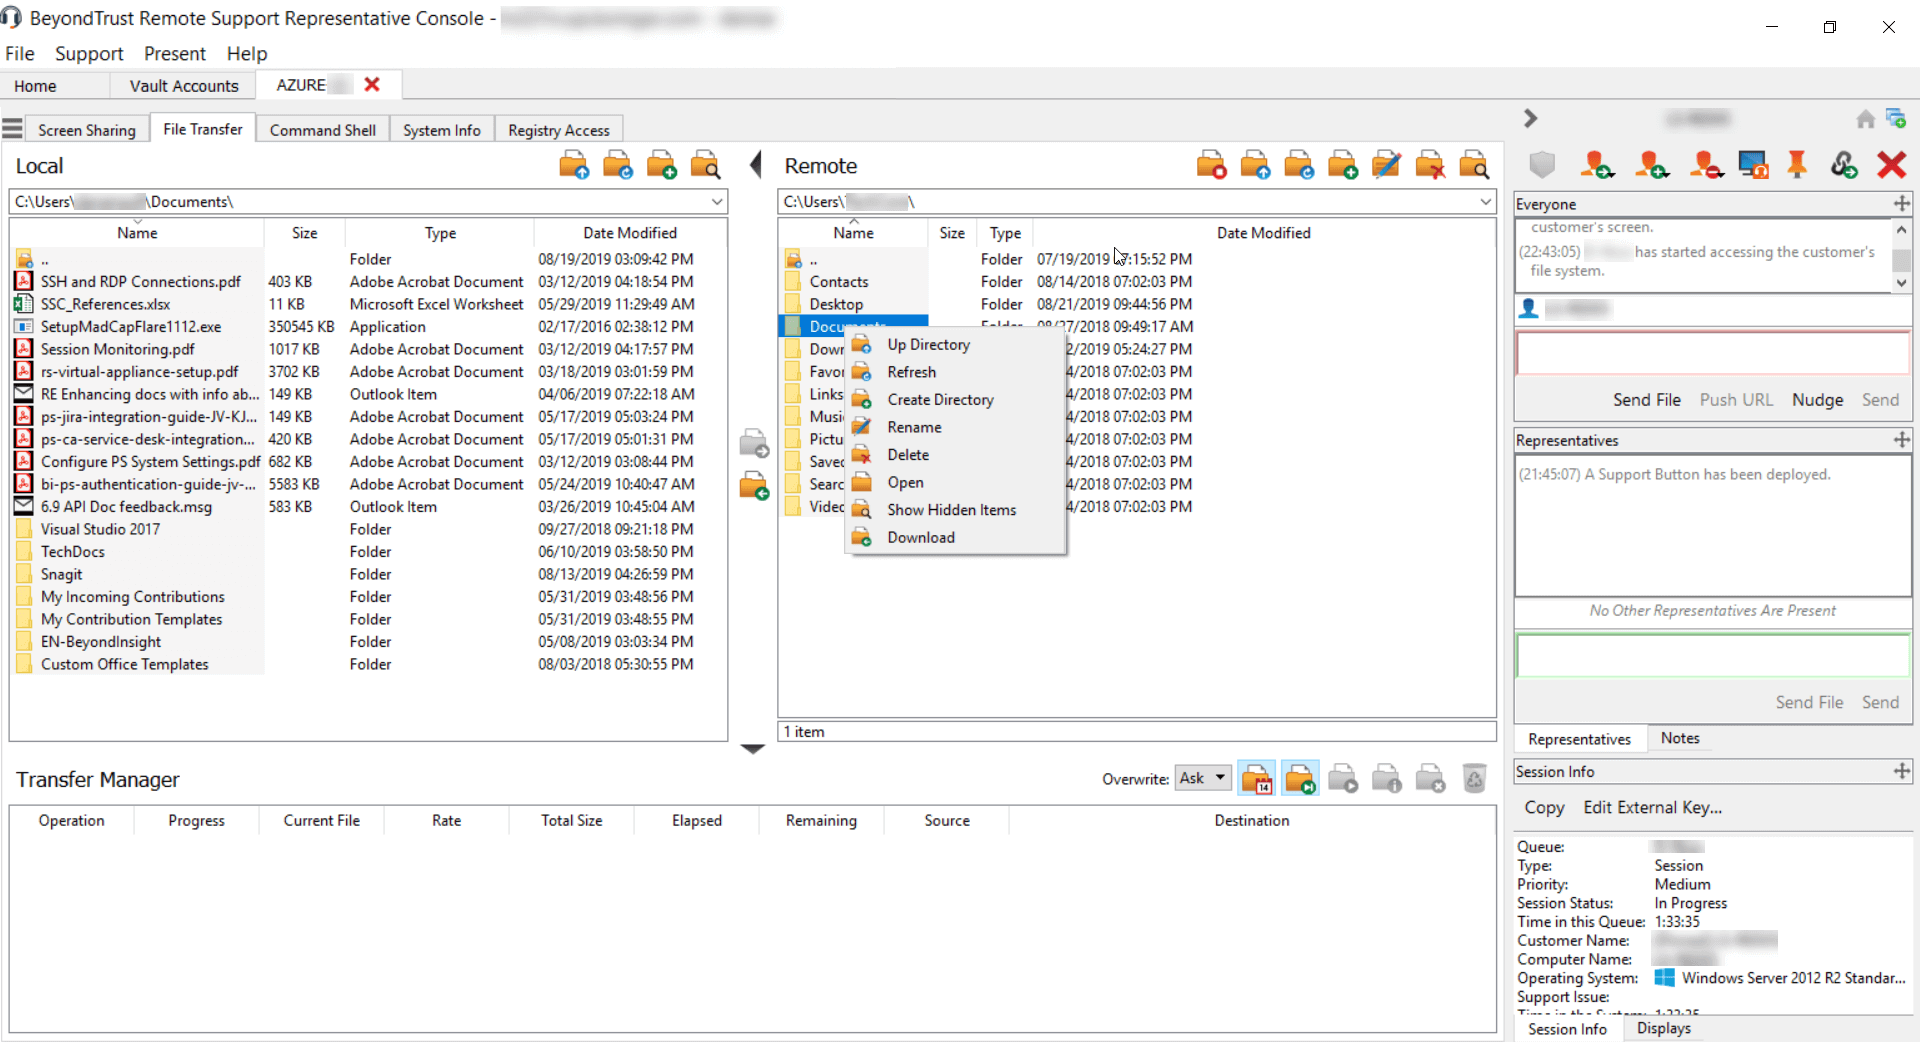 https://www.anyviewer.com/screenshot/others/beyondtrust/file-transfer-manager.png